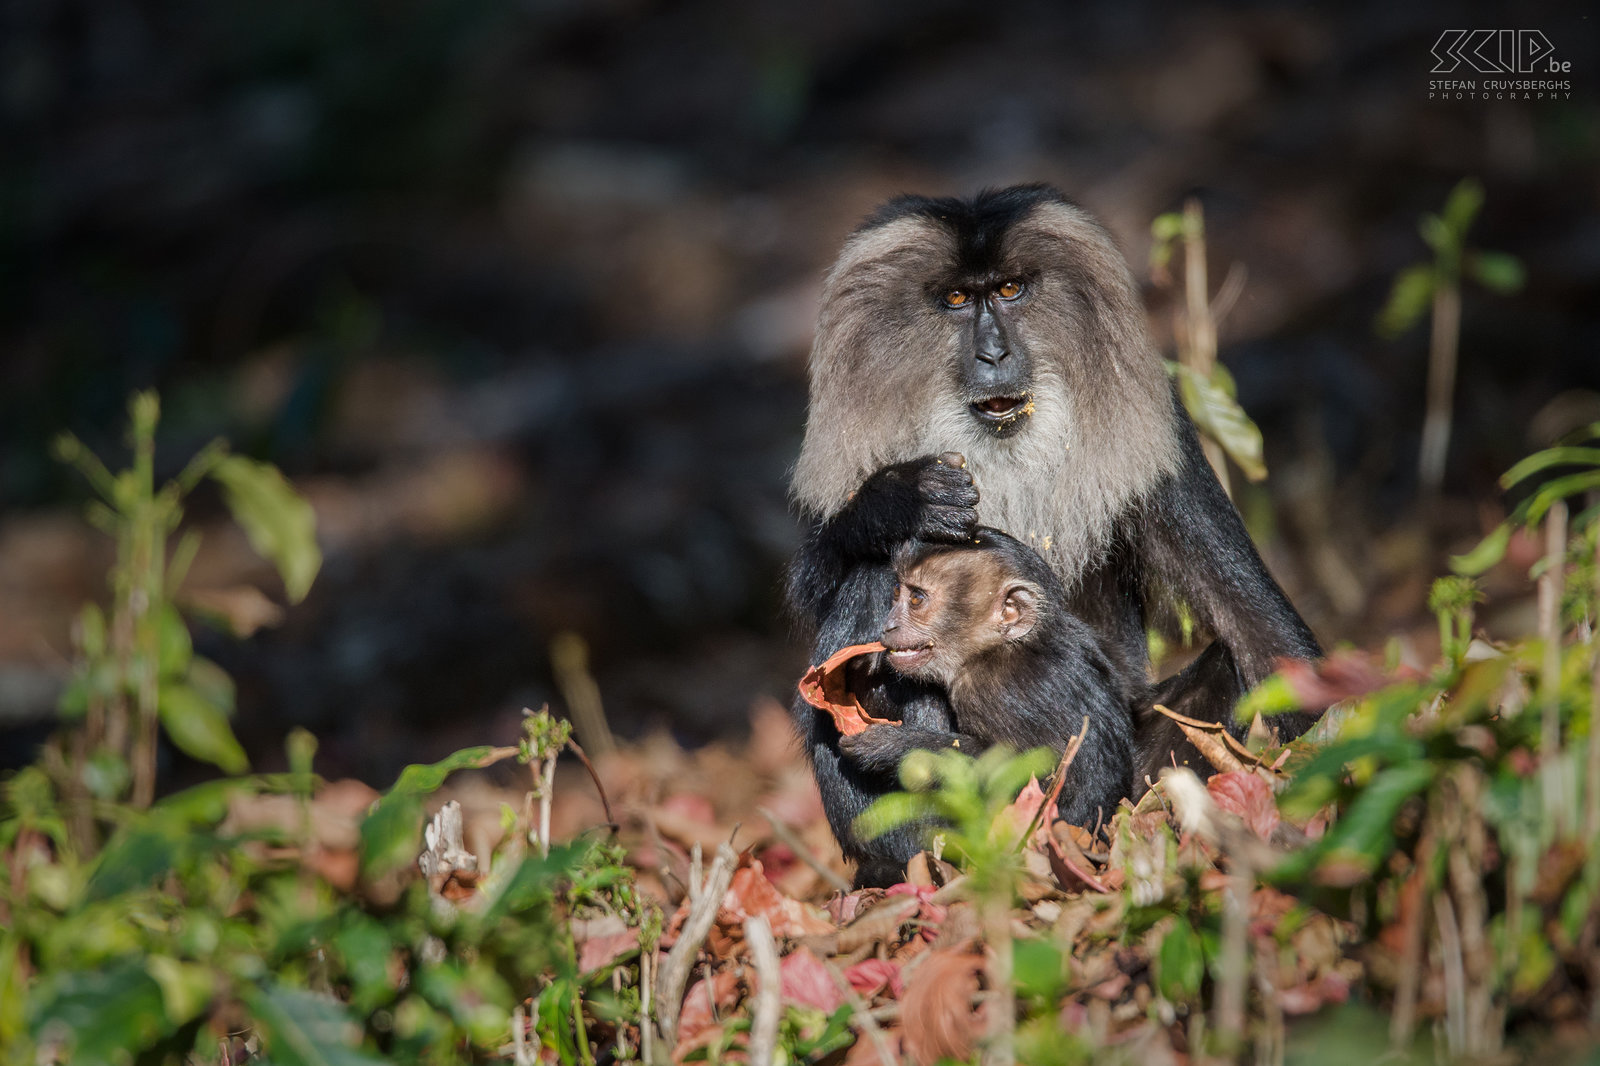 Valparai - Lion-tailed macaque with baby The lion-tailed macaque or the wanderoo (Macaca silenus) is an endangered monkey and endemic to the Western Ghats moutains in south India. They are beautiful monkeys that can be found in the forests of the teaplantions of Valparai. Stefan Cruysberghs